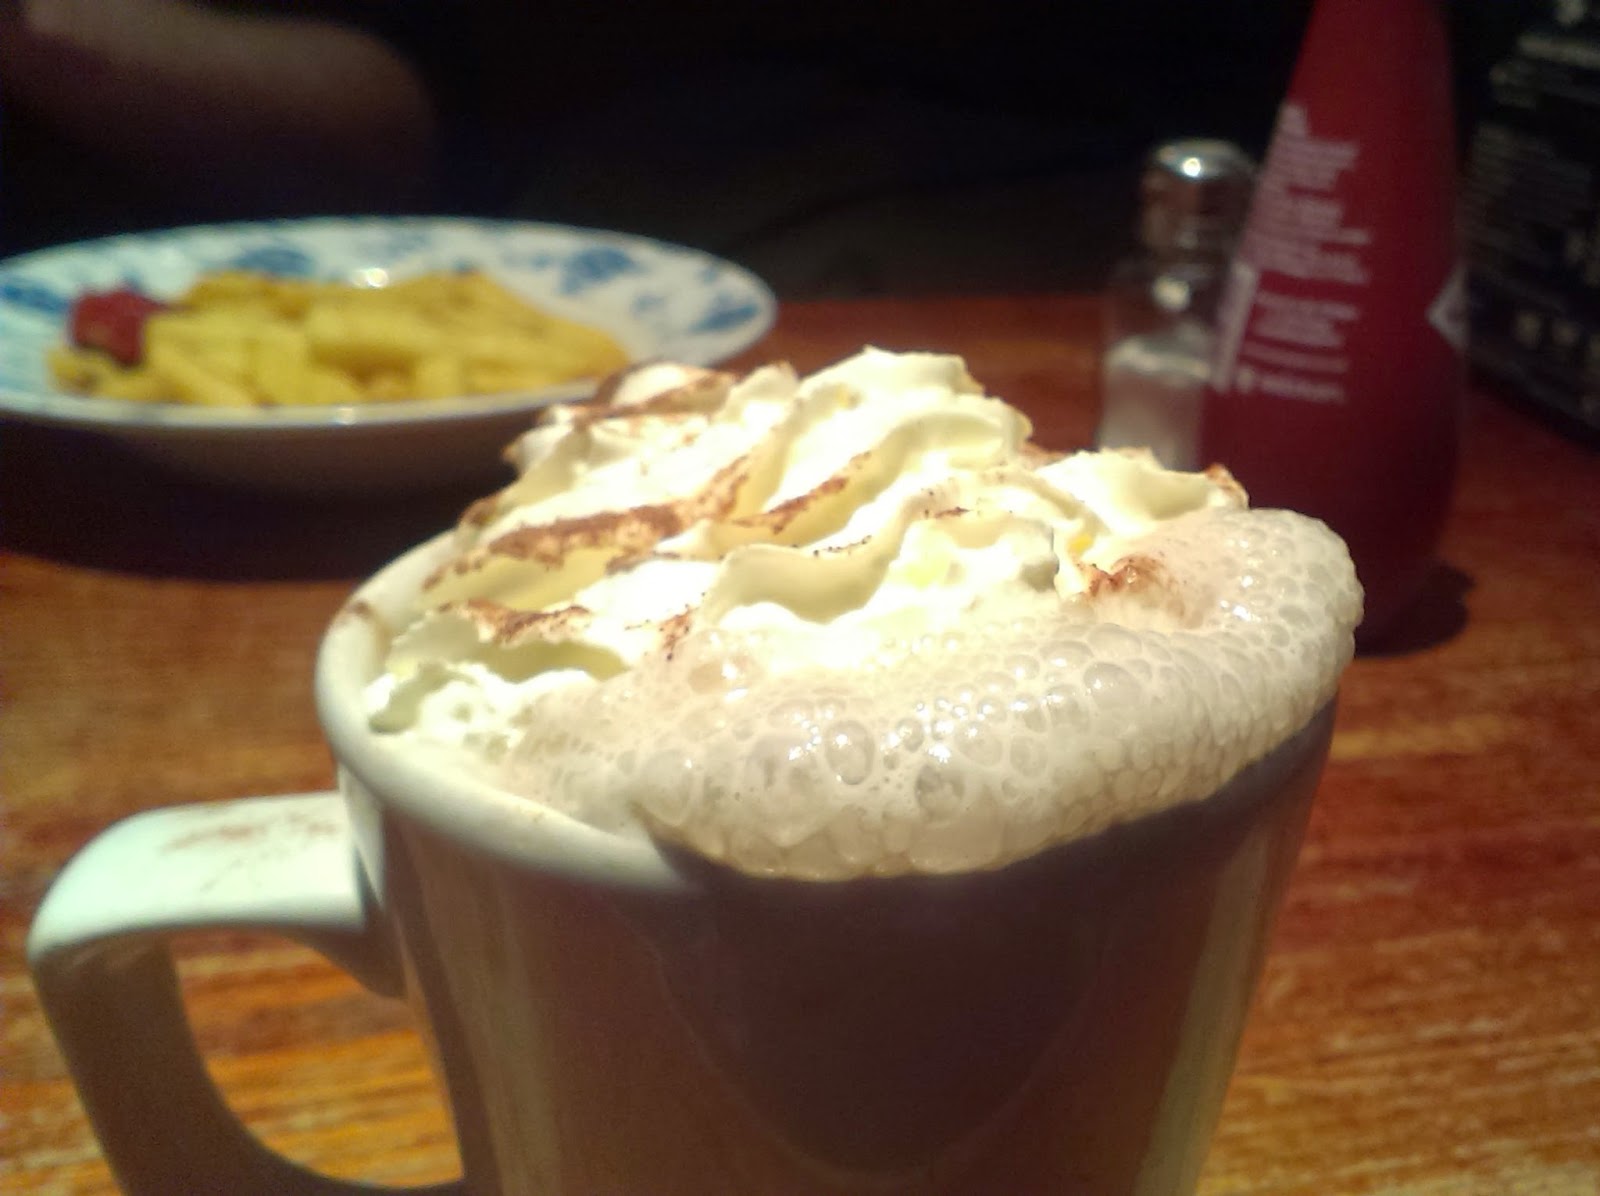 Wetherspoons Hot Chocolate